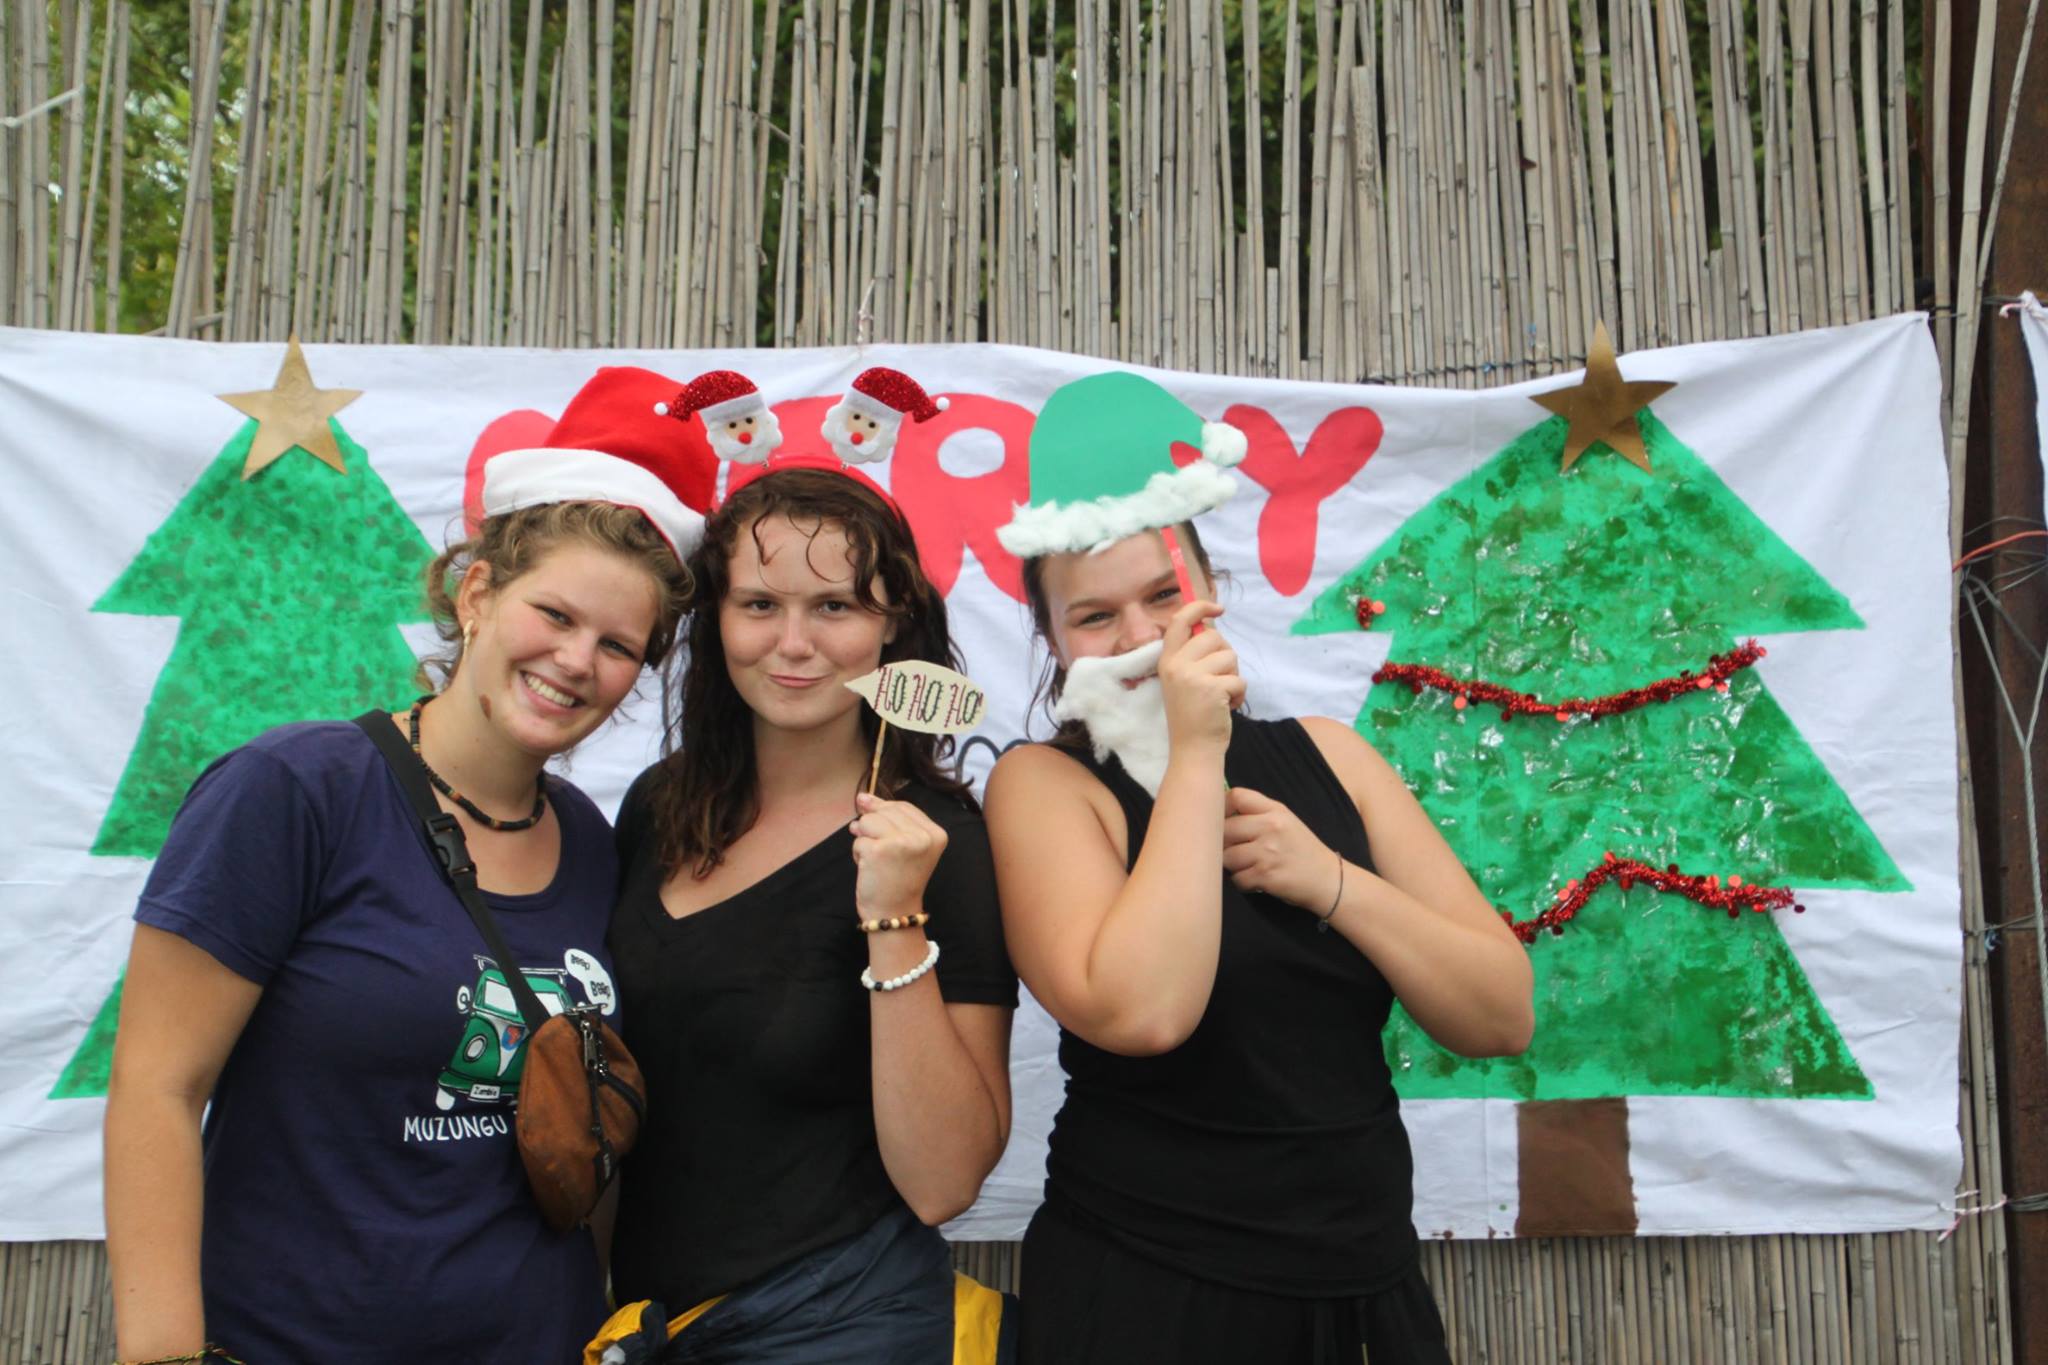 Three volunteers smiling for a photo together in Christmas outfits